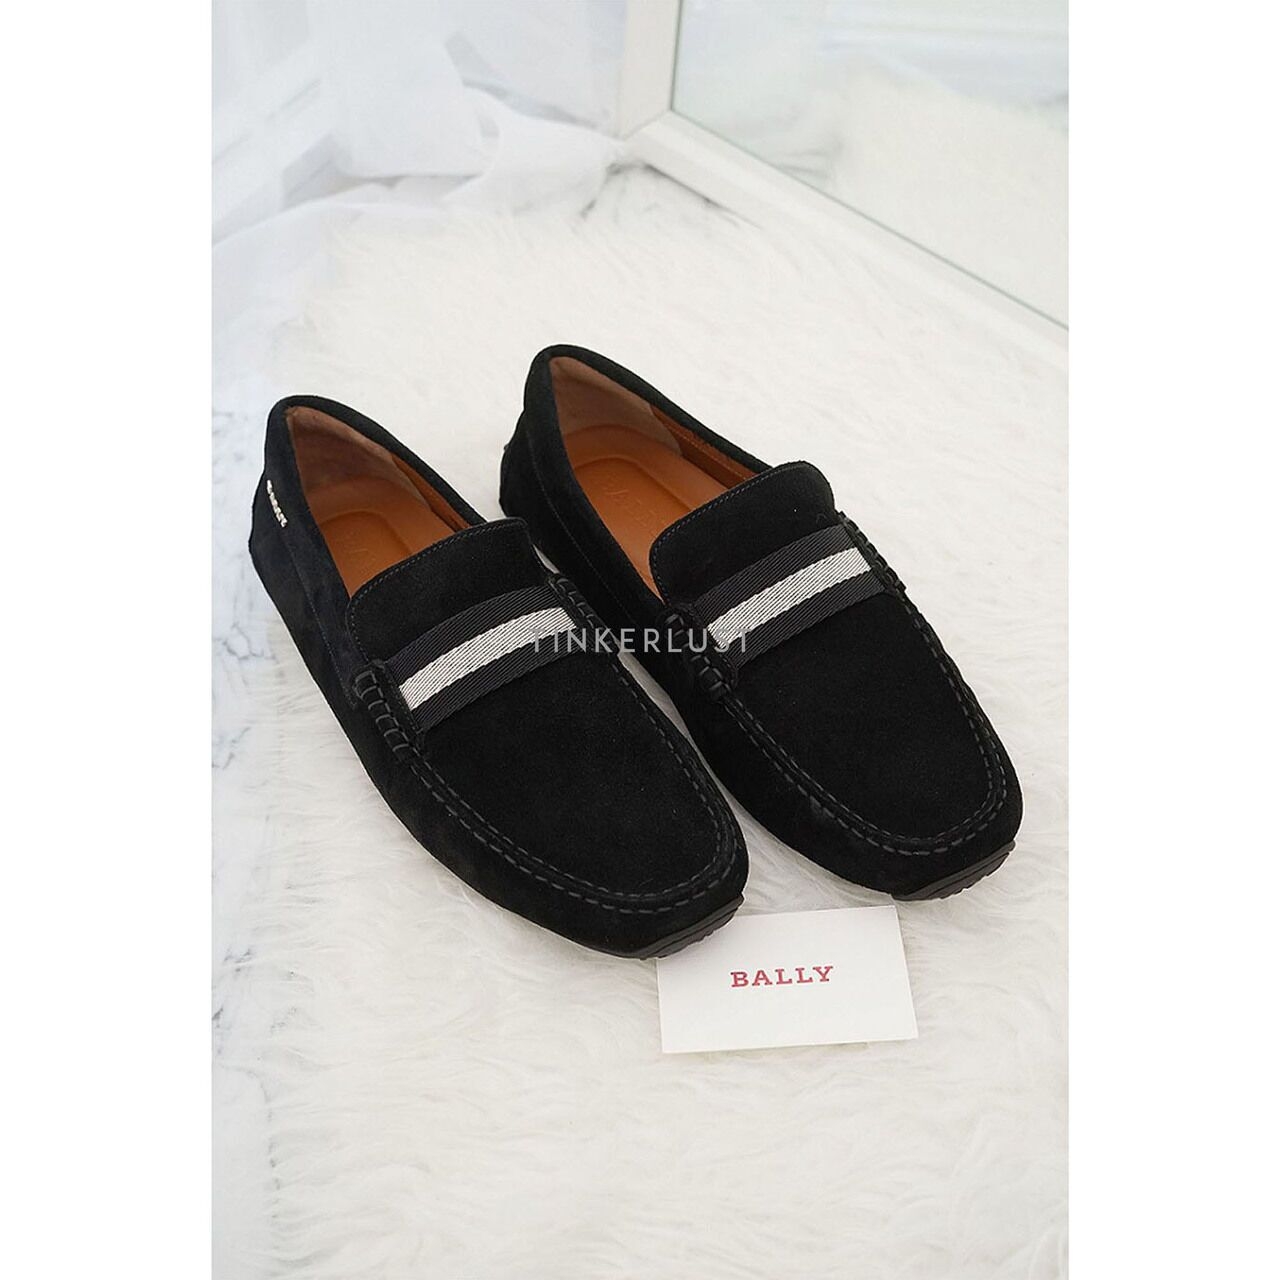 Bally Men Driver Pearce Loafers in Black Suede with Trainspotting Stripe